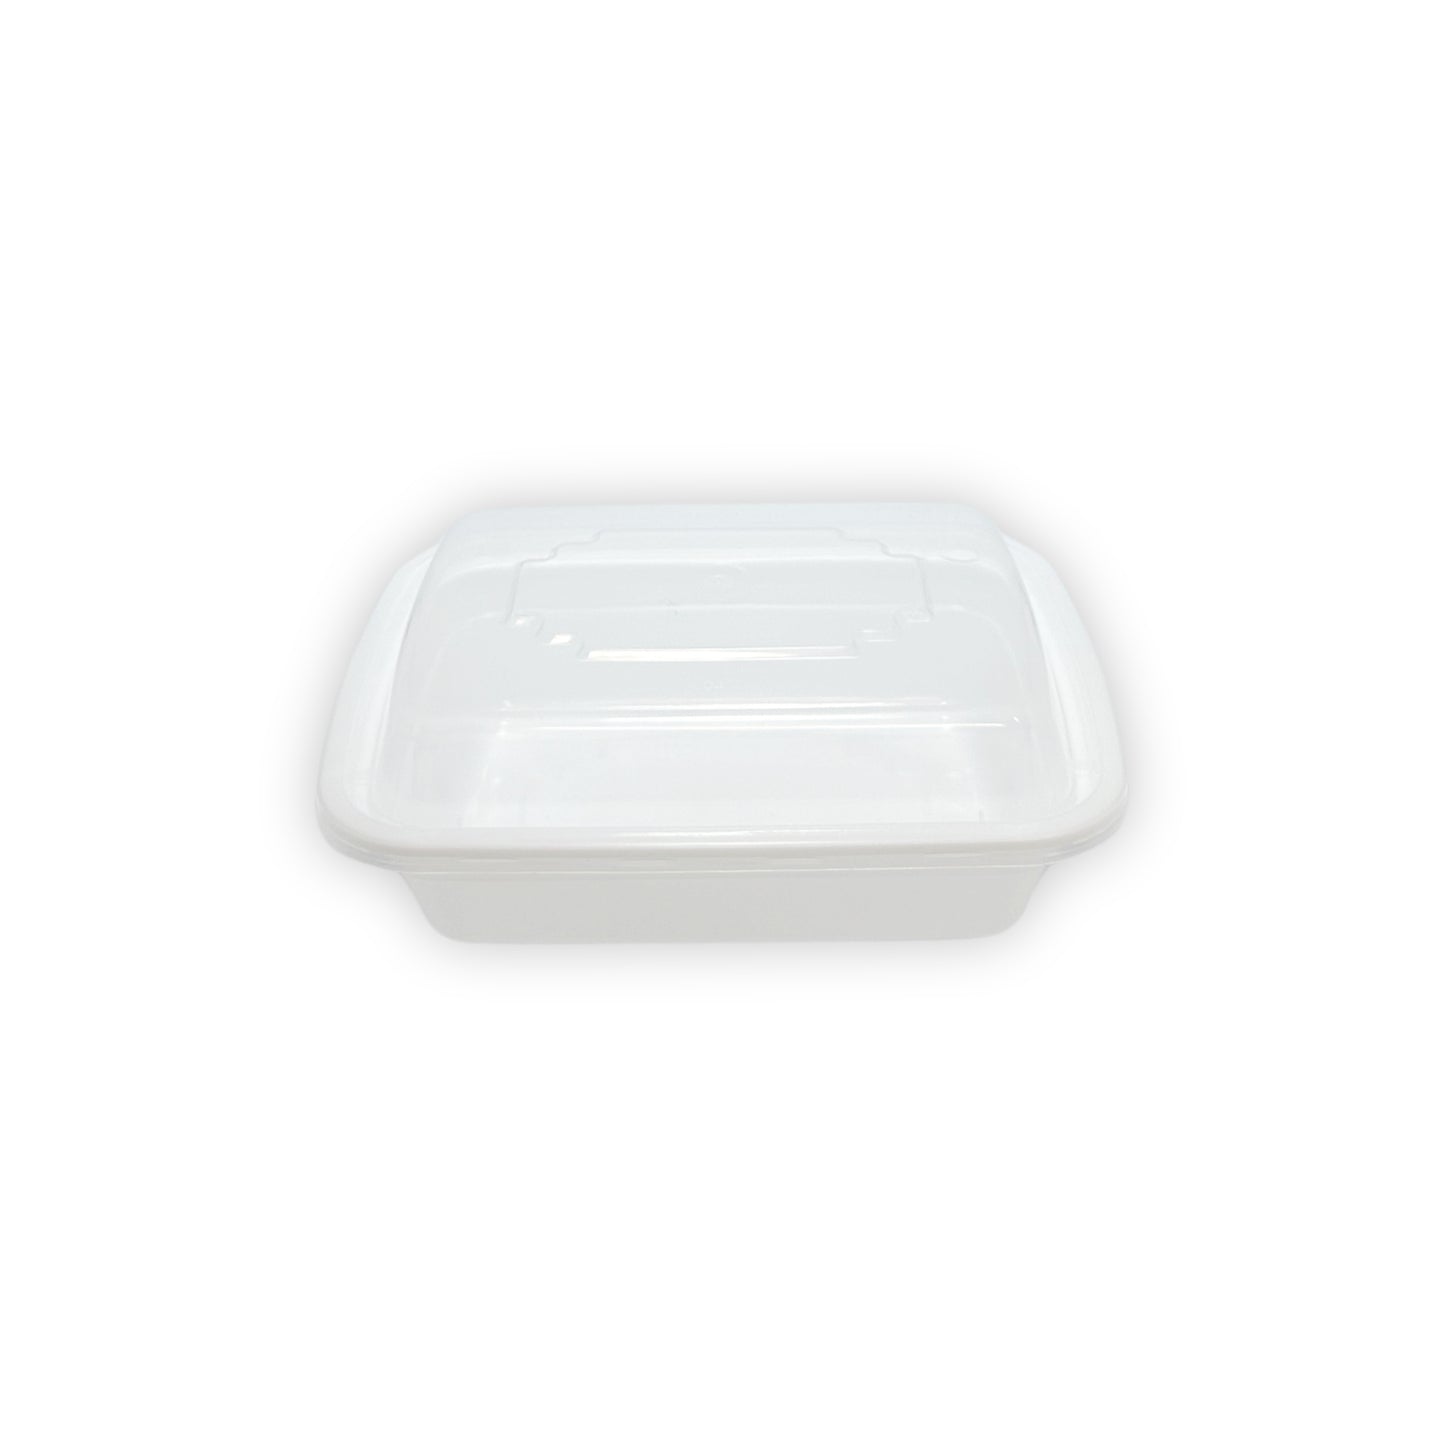 KIS-KY12G | 150sets 12oz, 355ml White PP Rectangle Container with Clear Lids Combo; $0.133/set